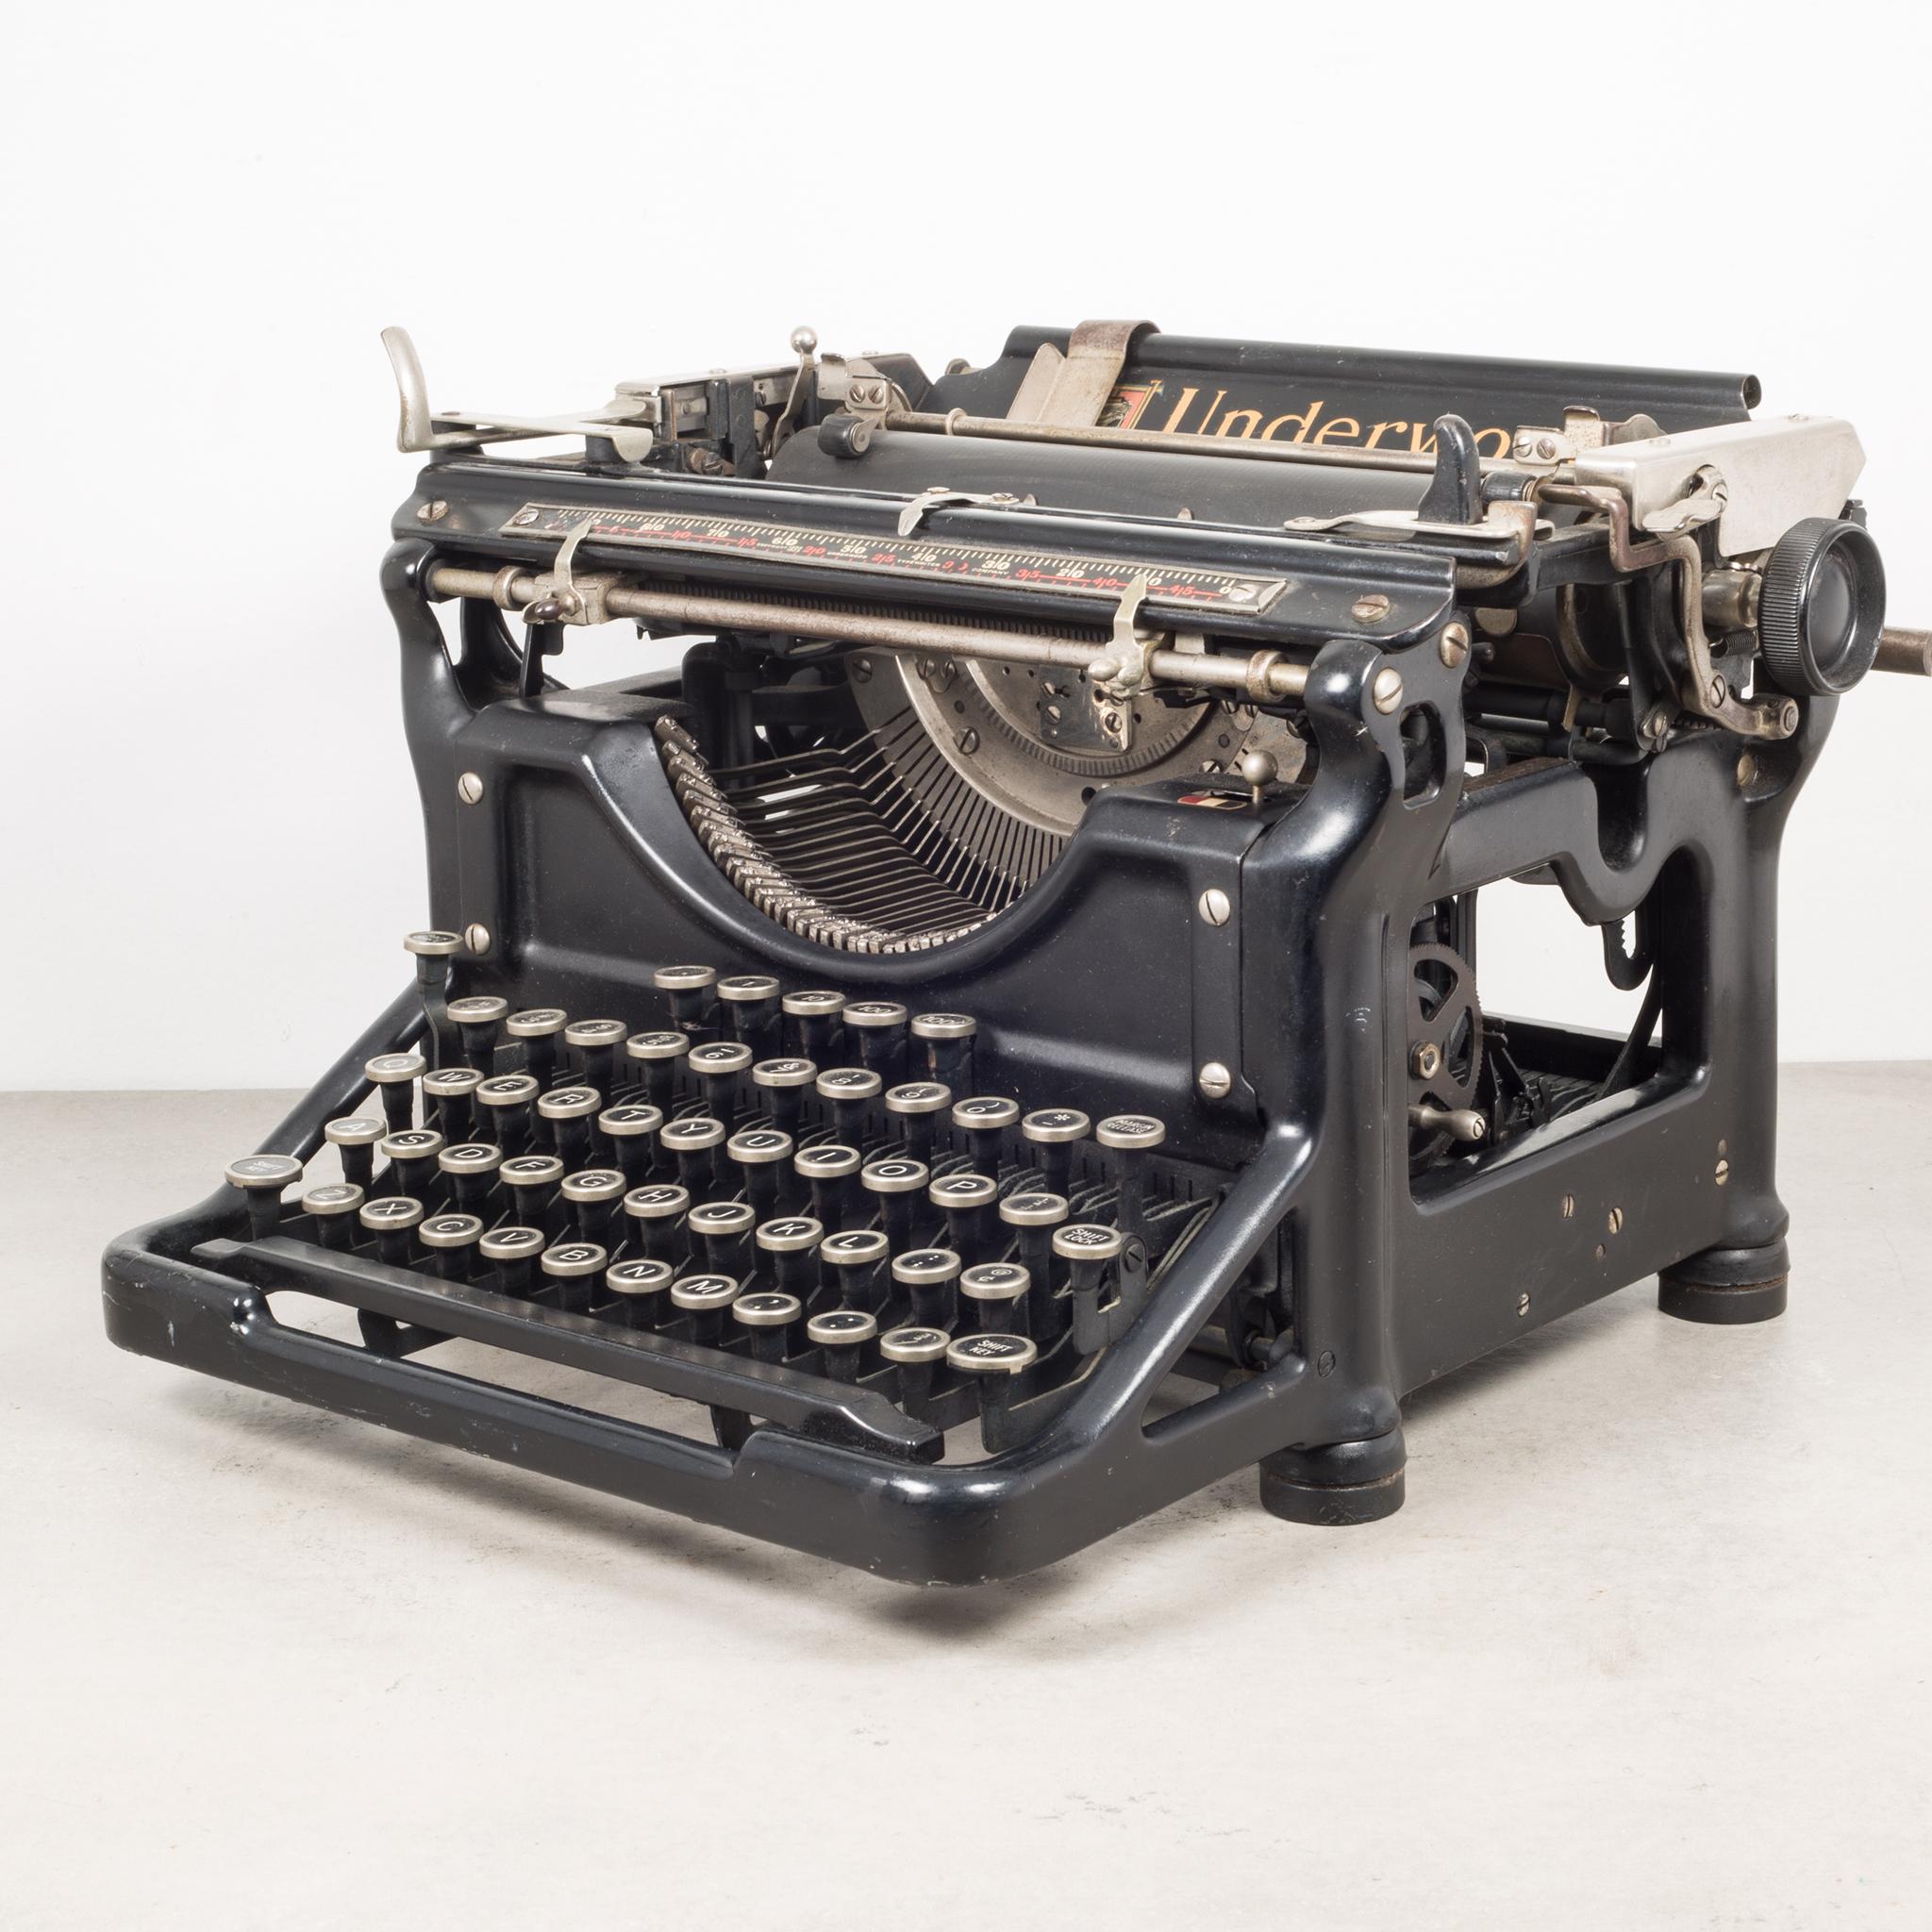 About

This is an original underwood typewriter #4 with a 16 inch carriage and an open-frame design. The serial number is 4077266-10 stamped in the inside. The keys are nickel and black. This typewriter has been serviced and cleaned. All the keys